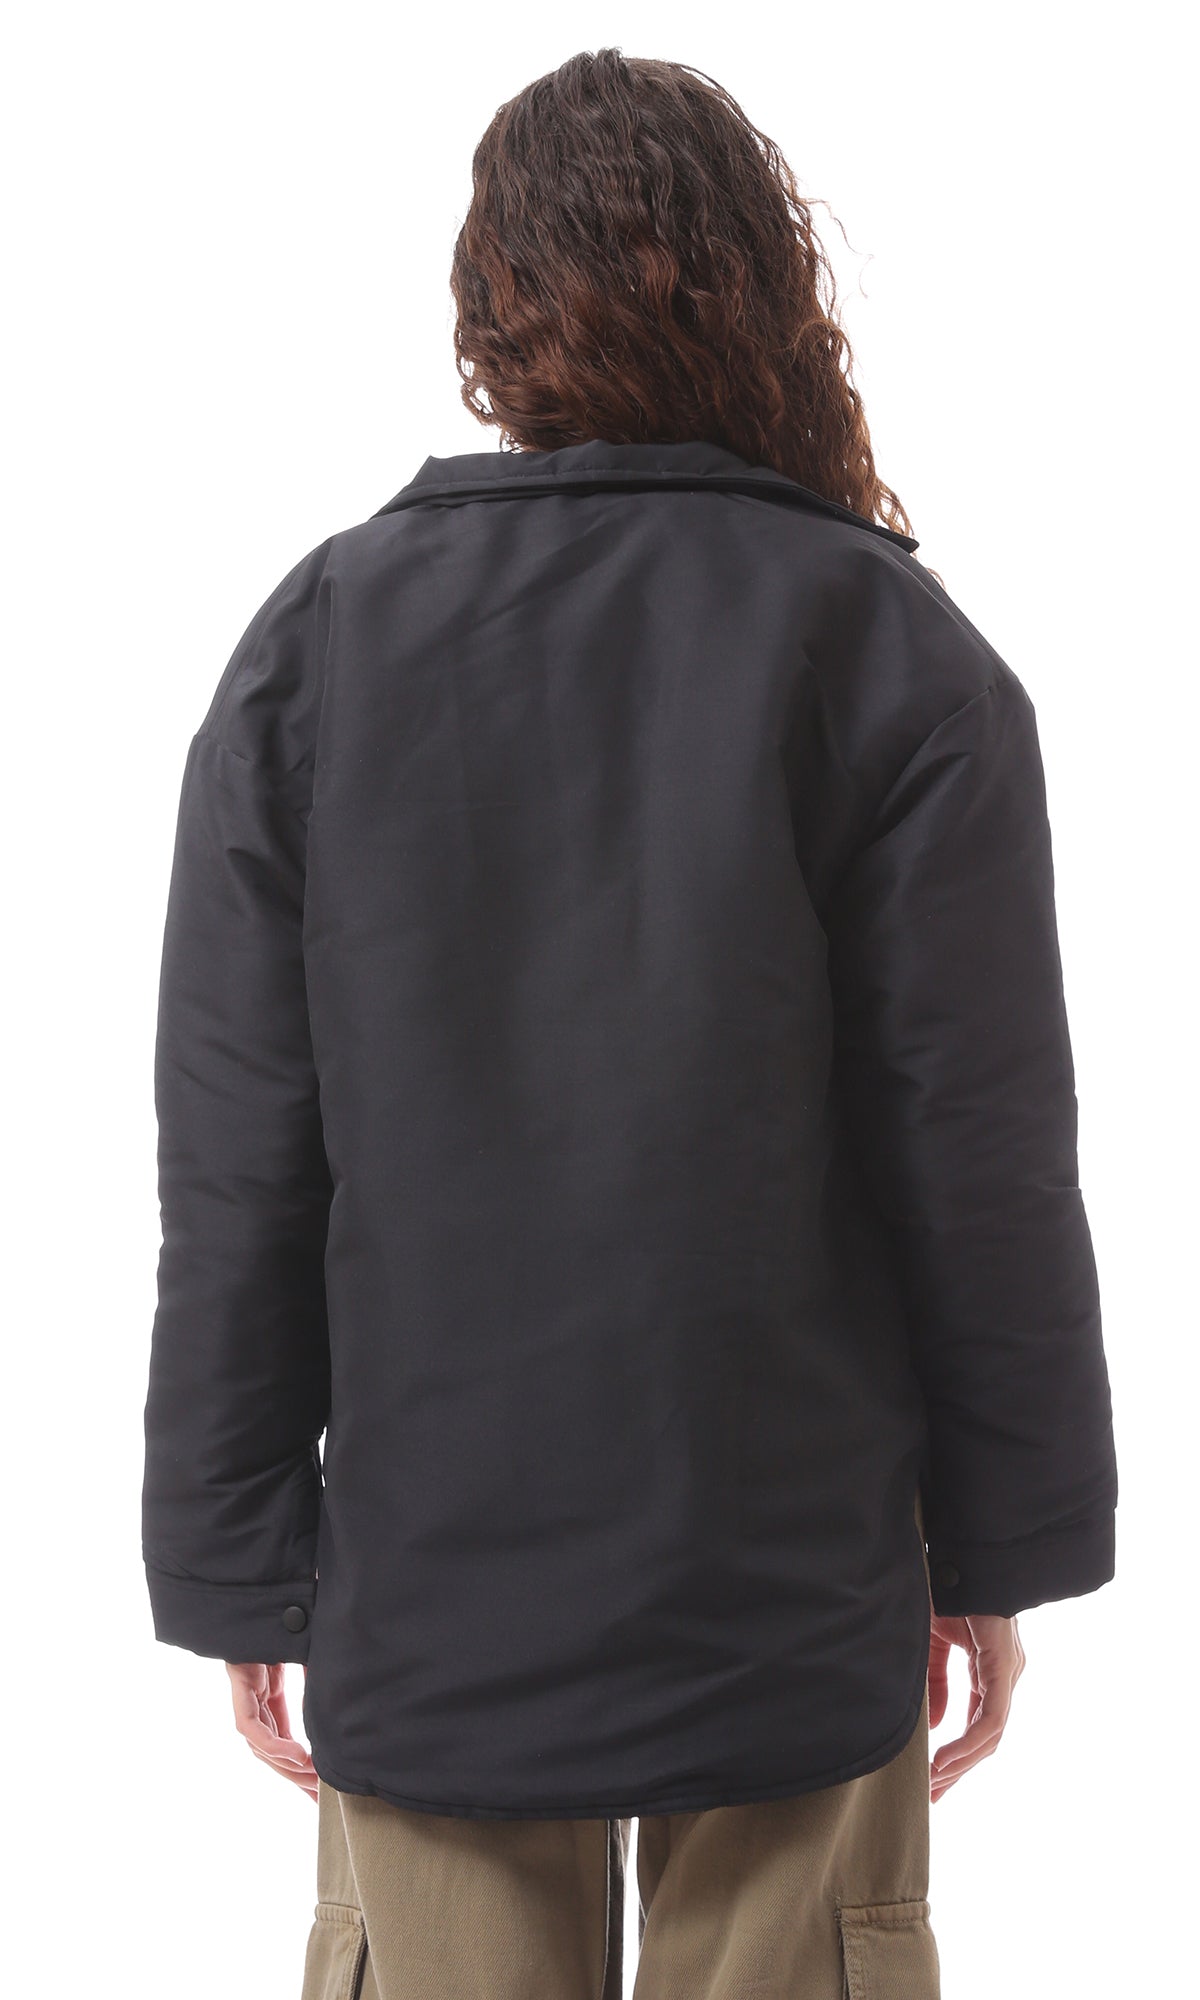 O170781 Black Polyester Buttoned Winter Jacket